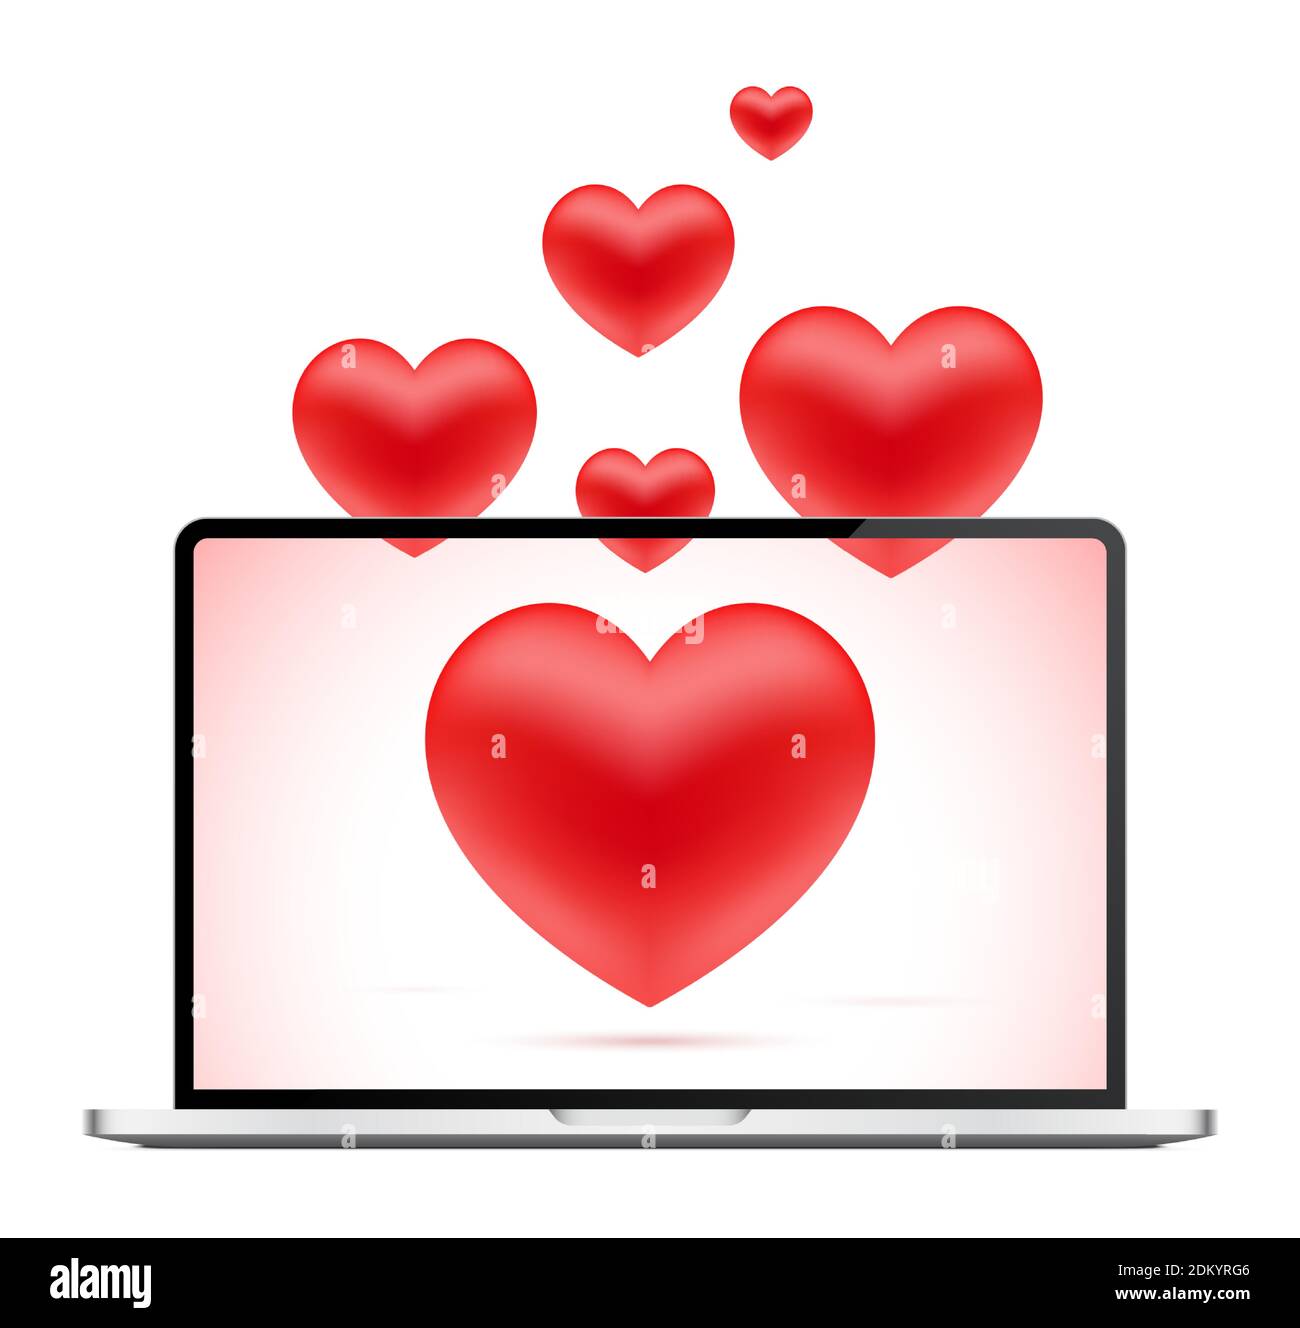 Romantic message concept, with red hearts flying out from an opened laptop. Vector illustration for Valentines day, or love relationships design decoration. Stock Vector